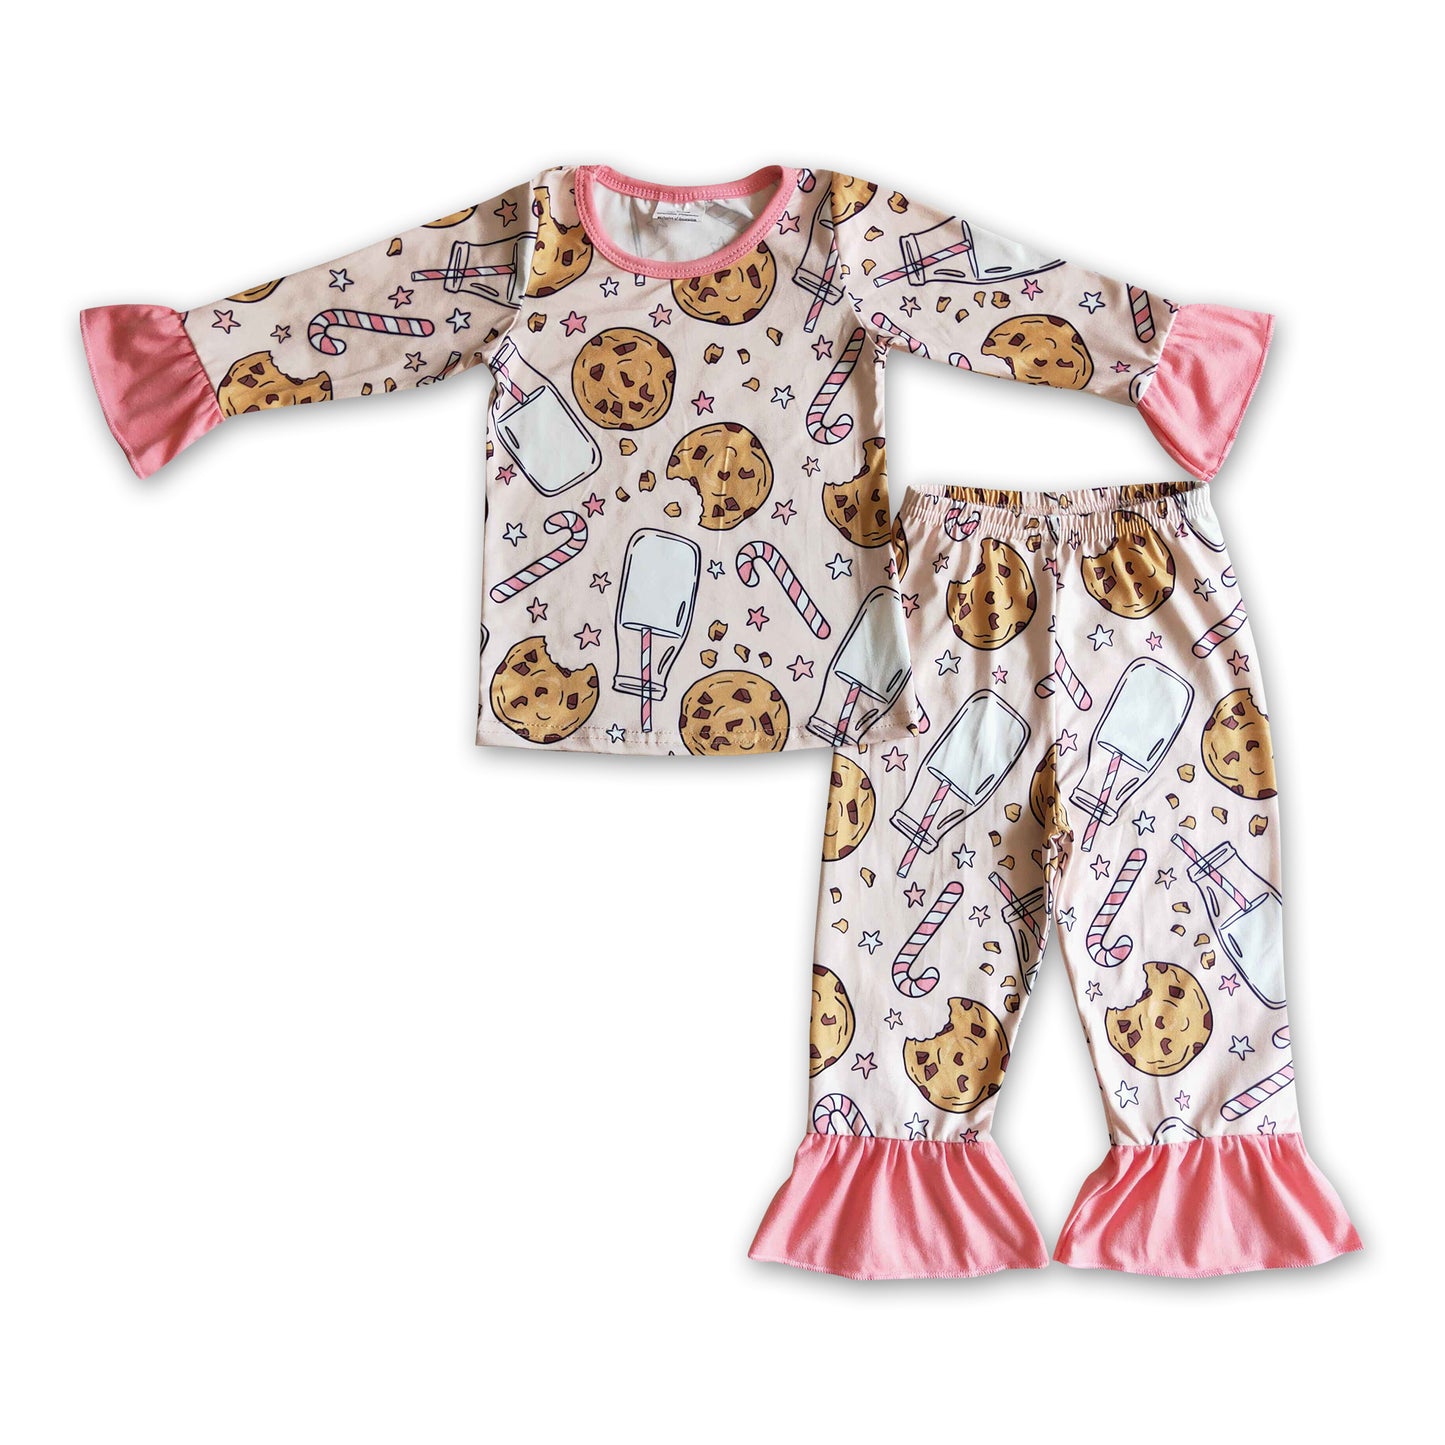 Biscuit milk candy cane girls Christmas pajamas